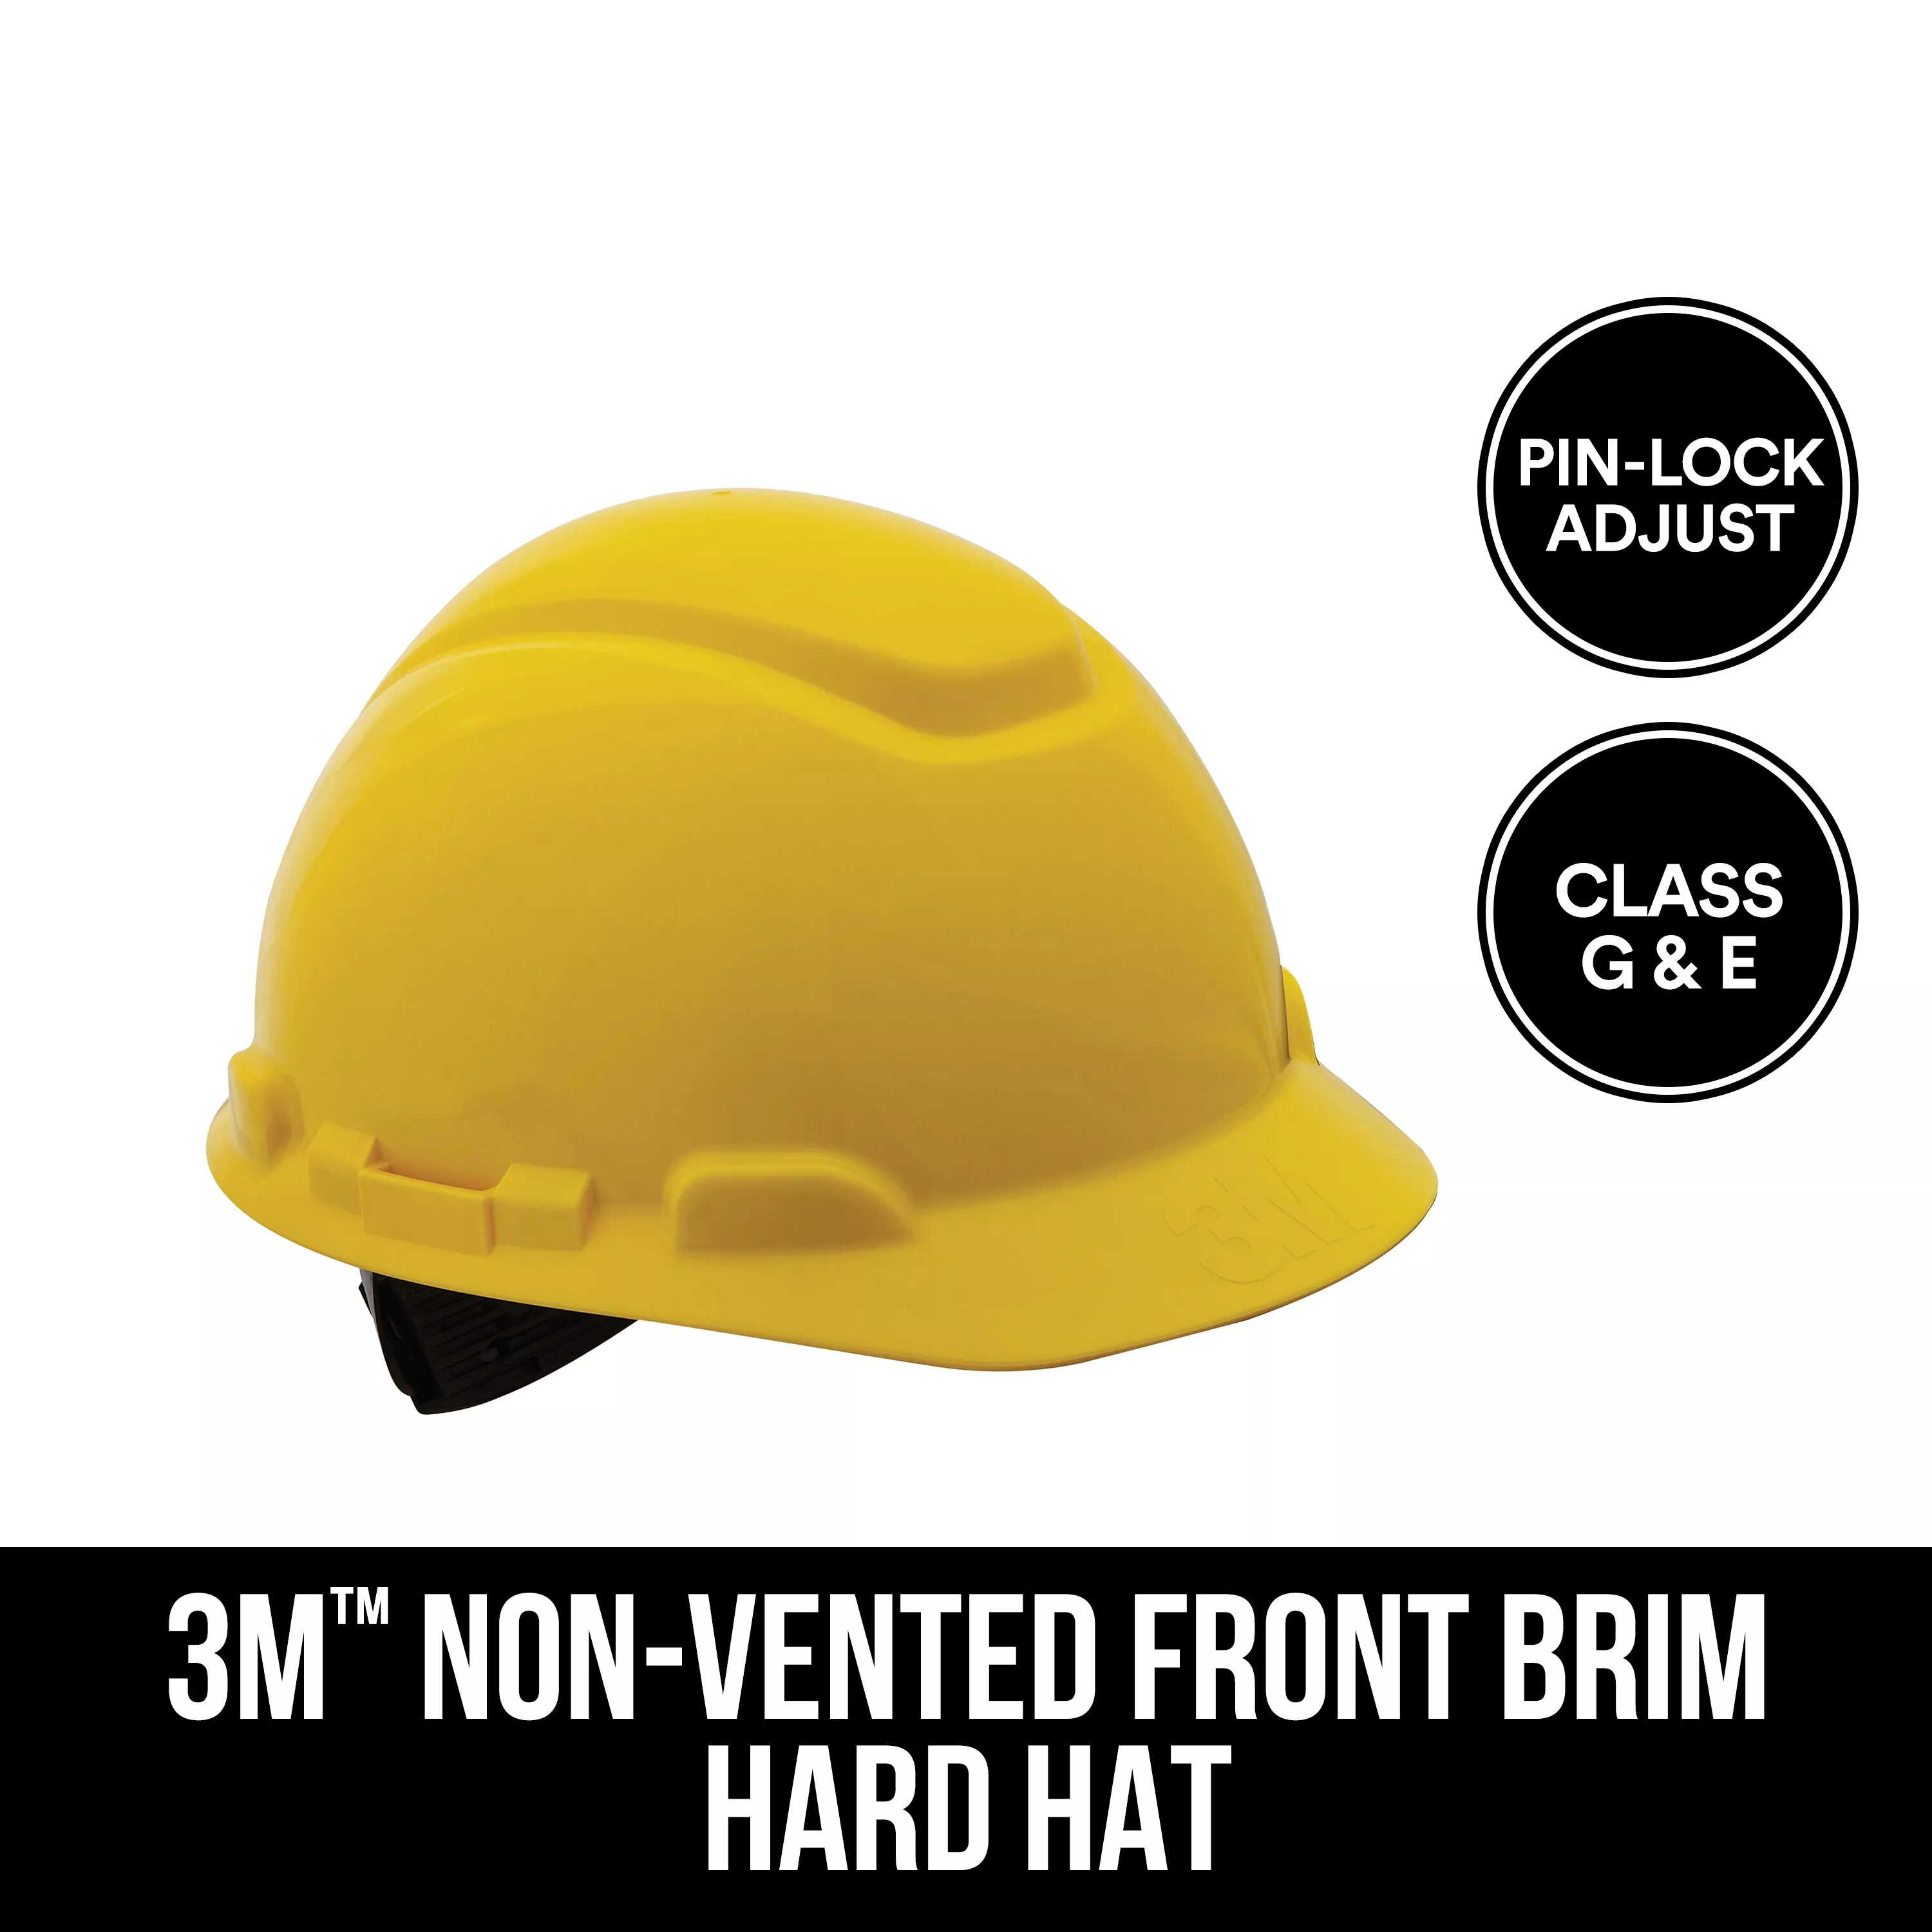 3M™ Non-Vented Hard Hat with Pinlock Adjustment, CHHYH1-12-DC, 12/case